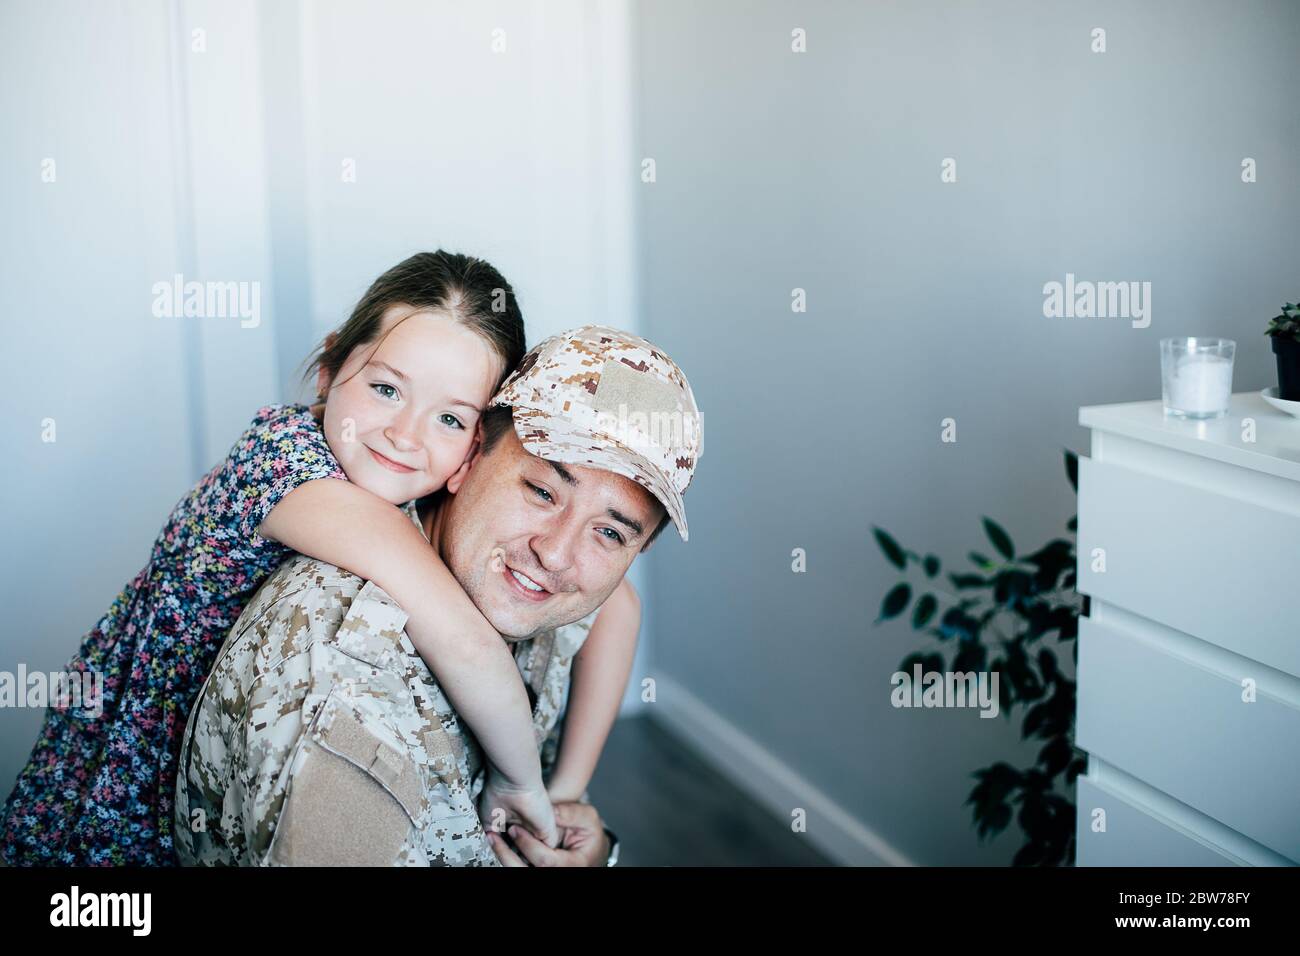 Military man father hugs daughter. Portrait of happy american family. Stock Photo